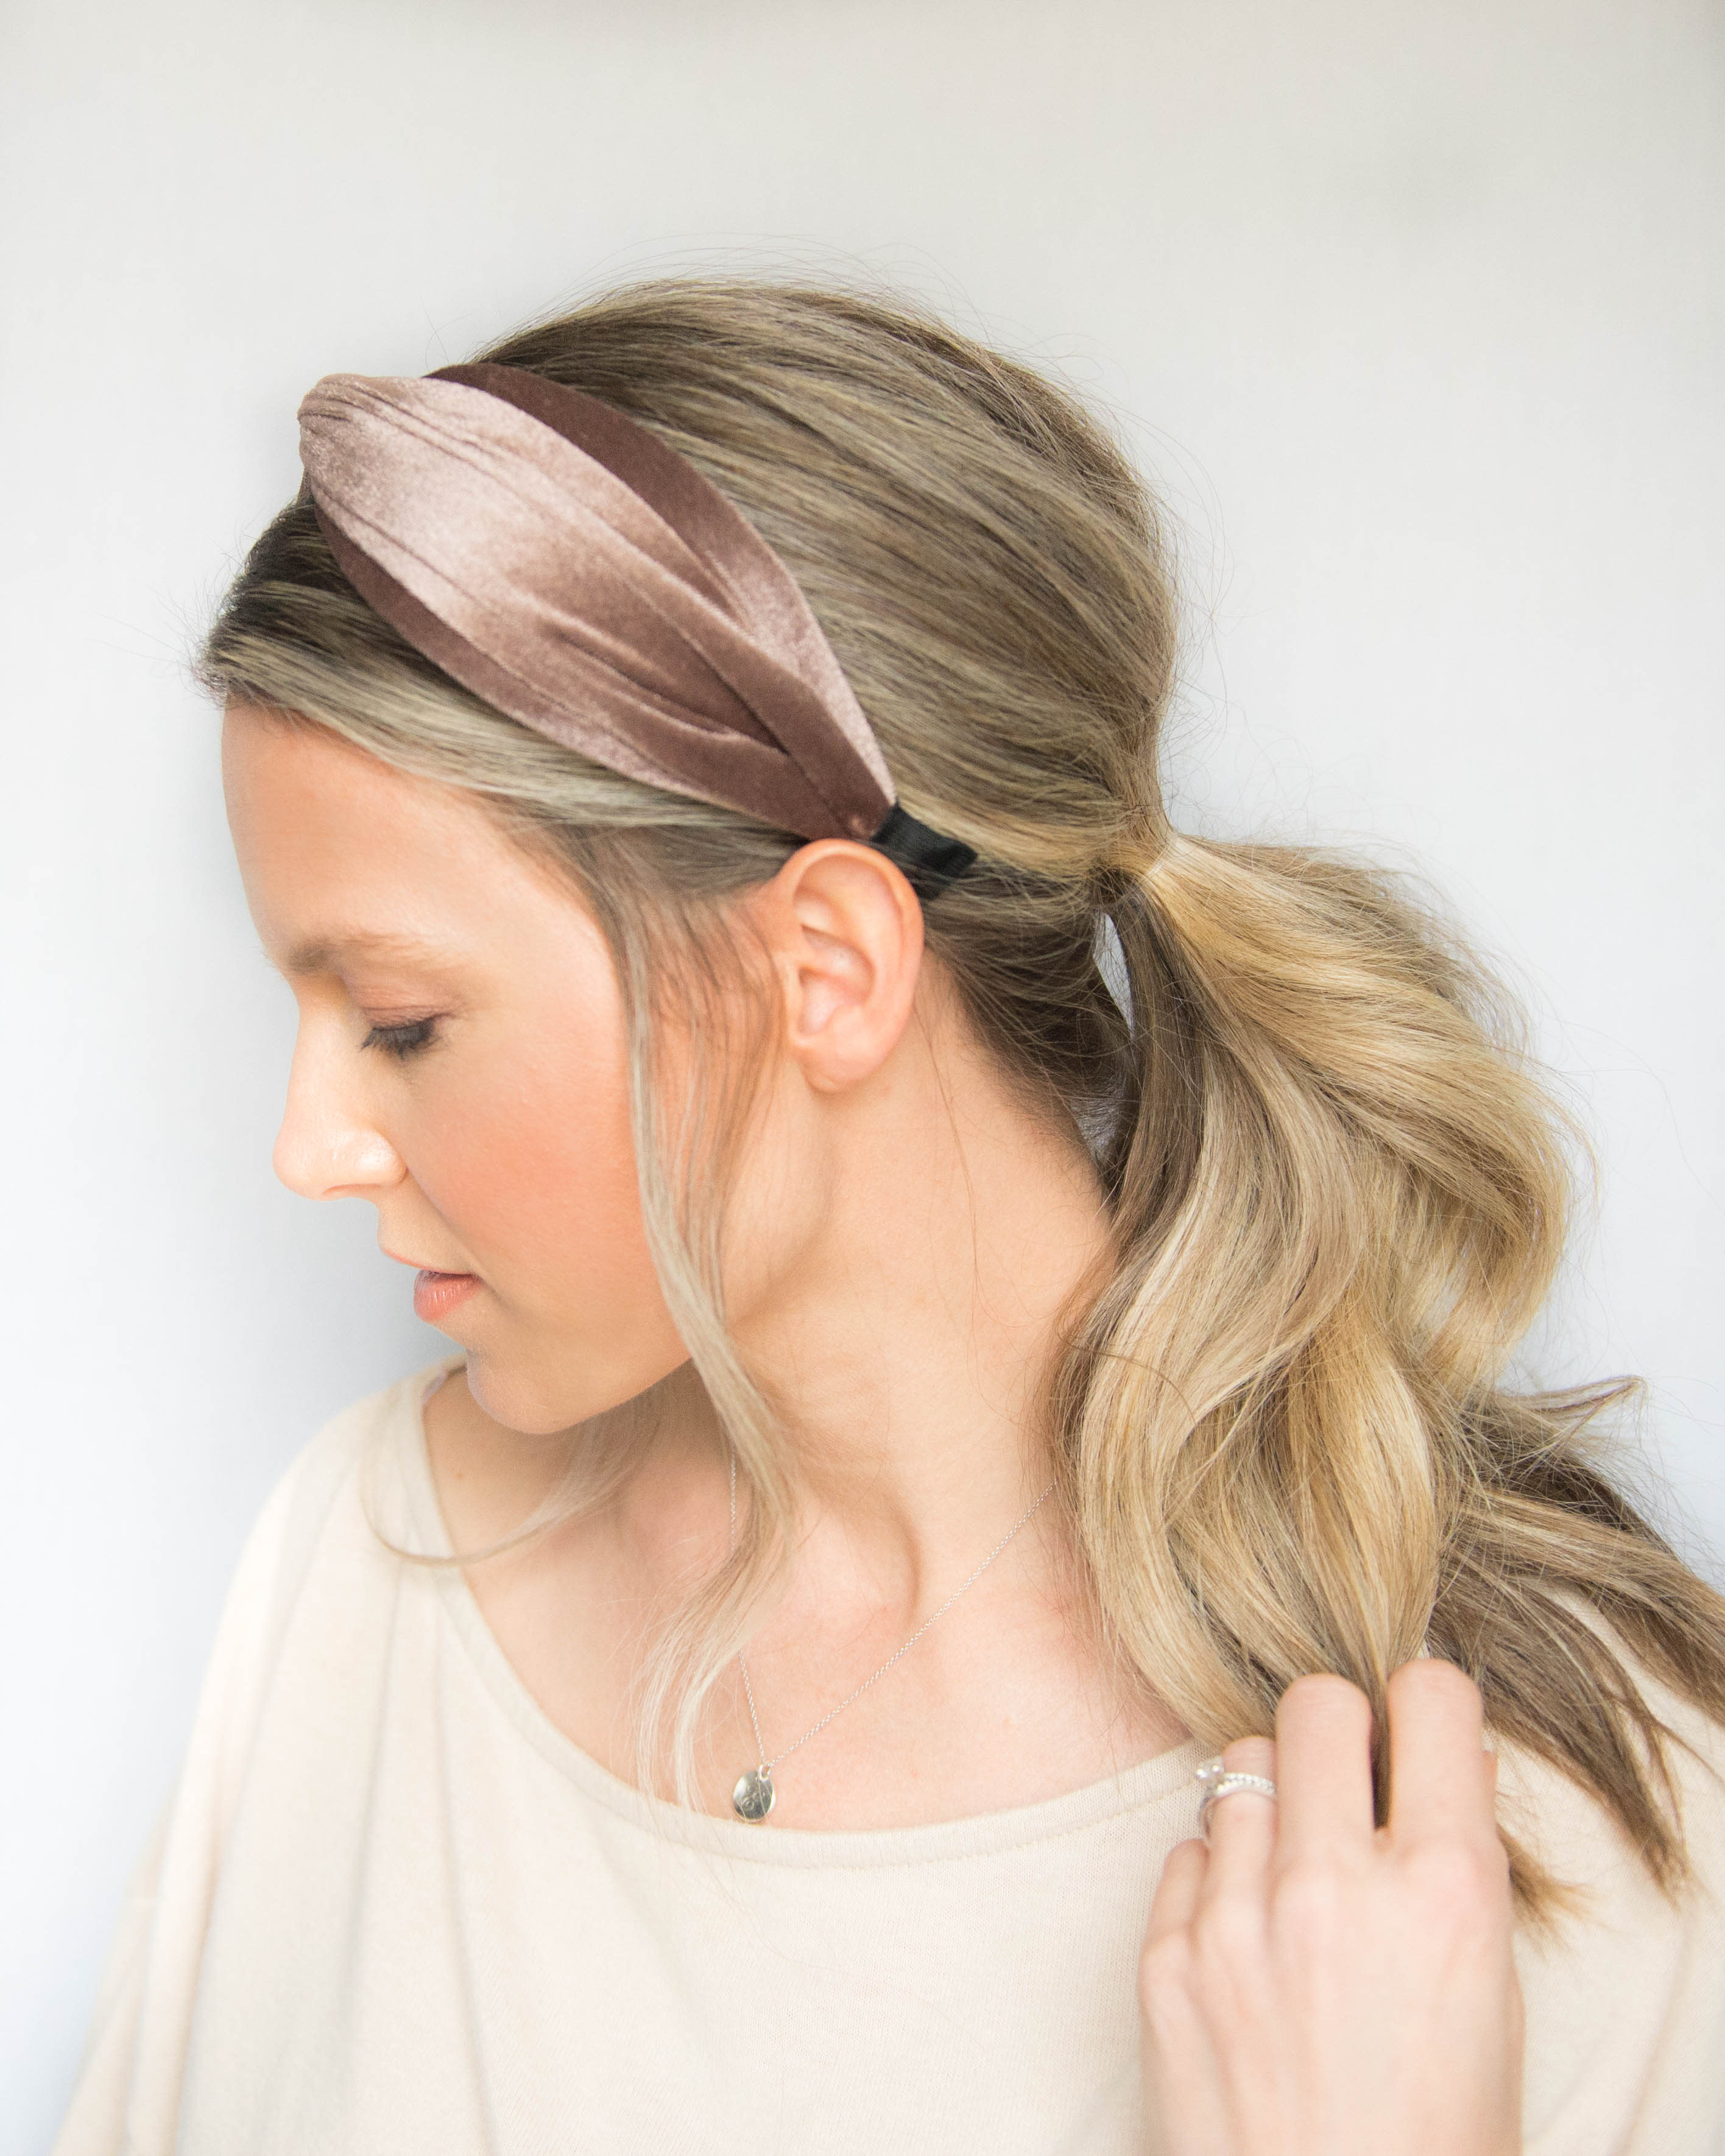 How To Wear A Headband: Effortless Hairstyles For Everyday   Fashion Blog